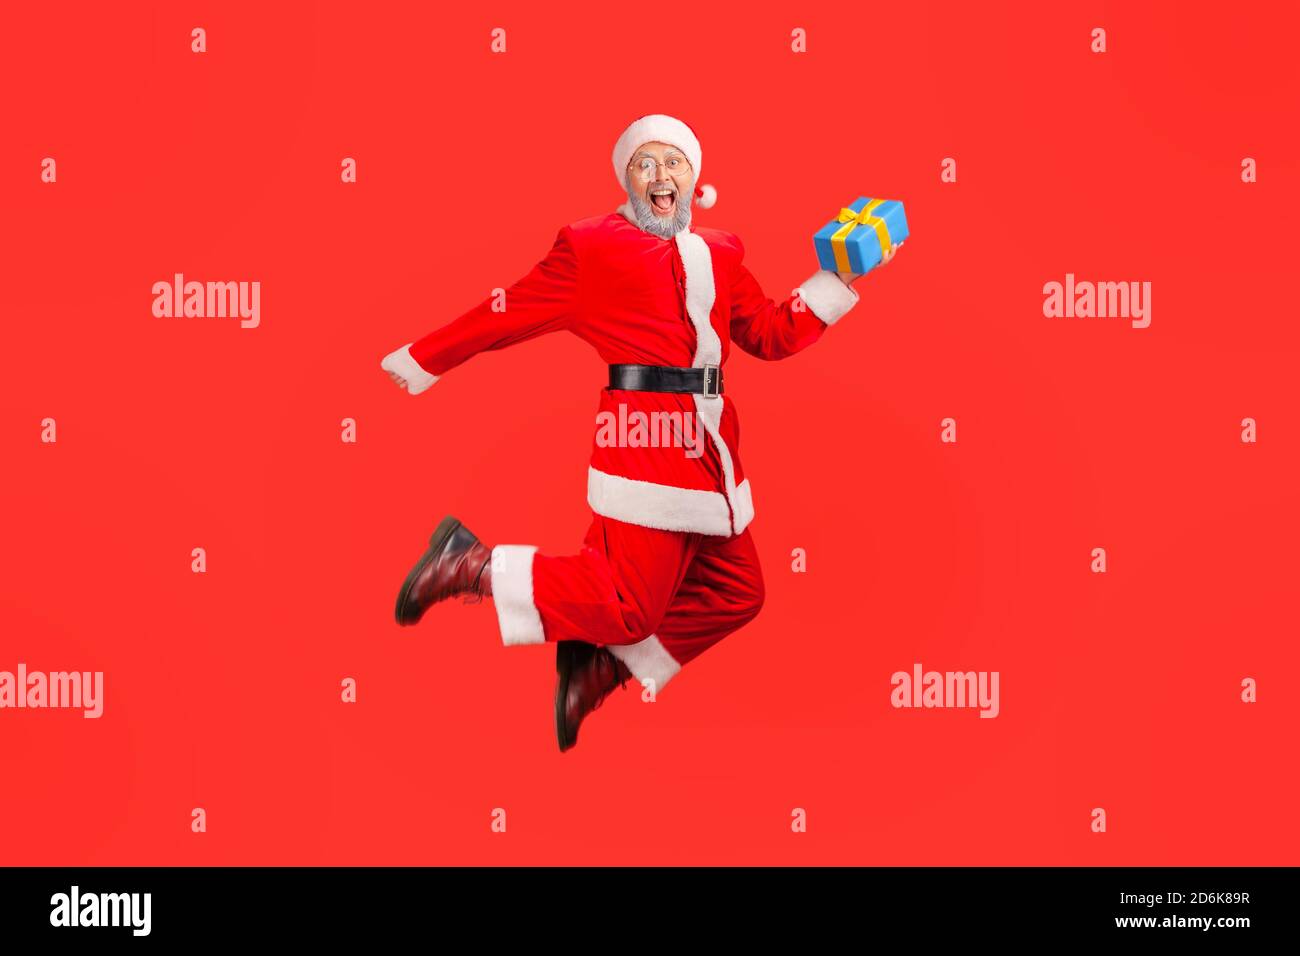 Extremely happy santa claus holding gift box jumping high and looking at camera with toothy smile, satisfied with winter holidays. Indoor studio shot Stock Photo